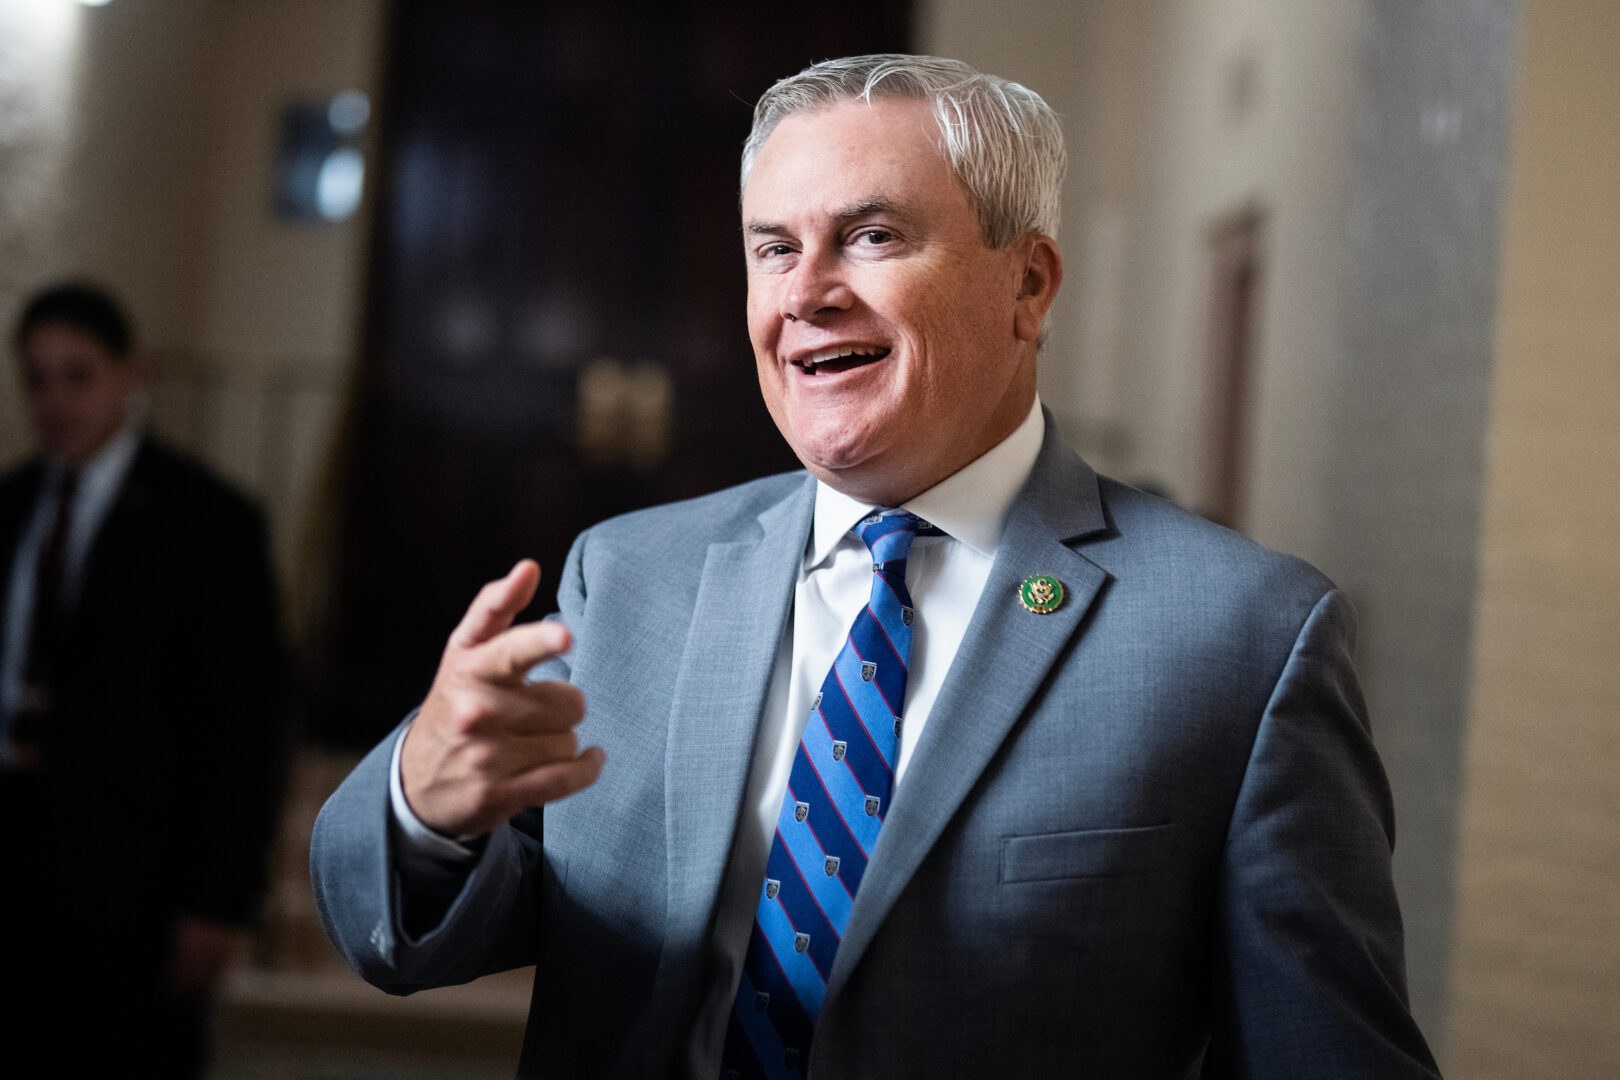 Rep. James R. Comer’s earmark total jumped more than tenfold from less than $20 million in last year’s House bills.